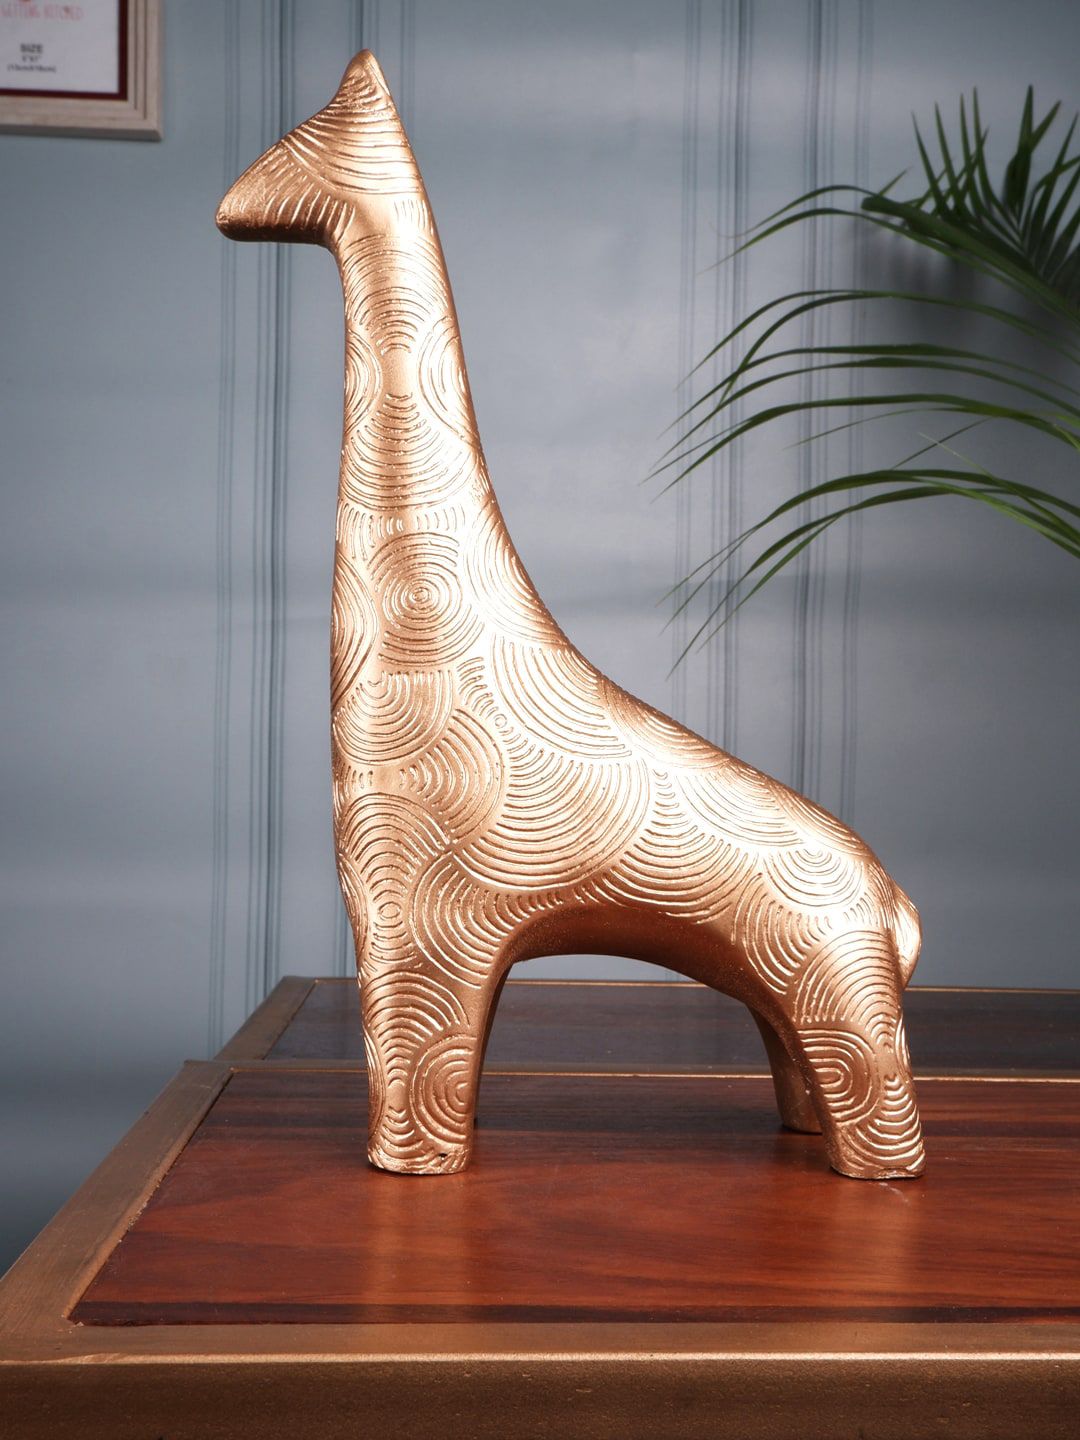 THE WHITE INK DECOR Gold-Toned Modern Art Figurine Showpieces Price in India